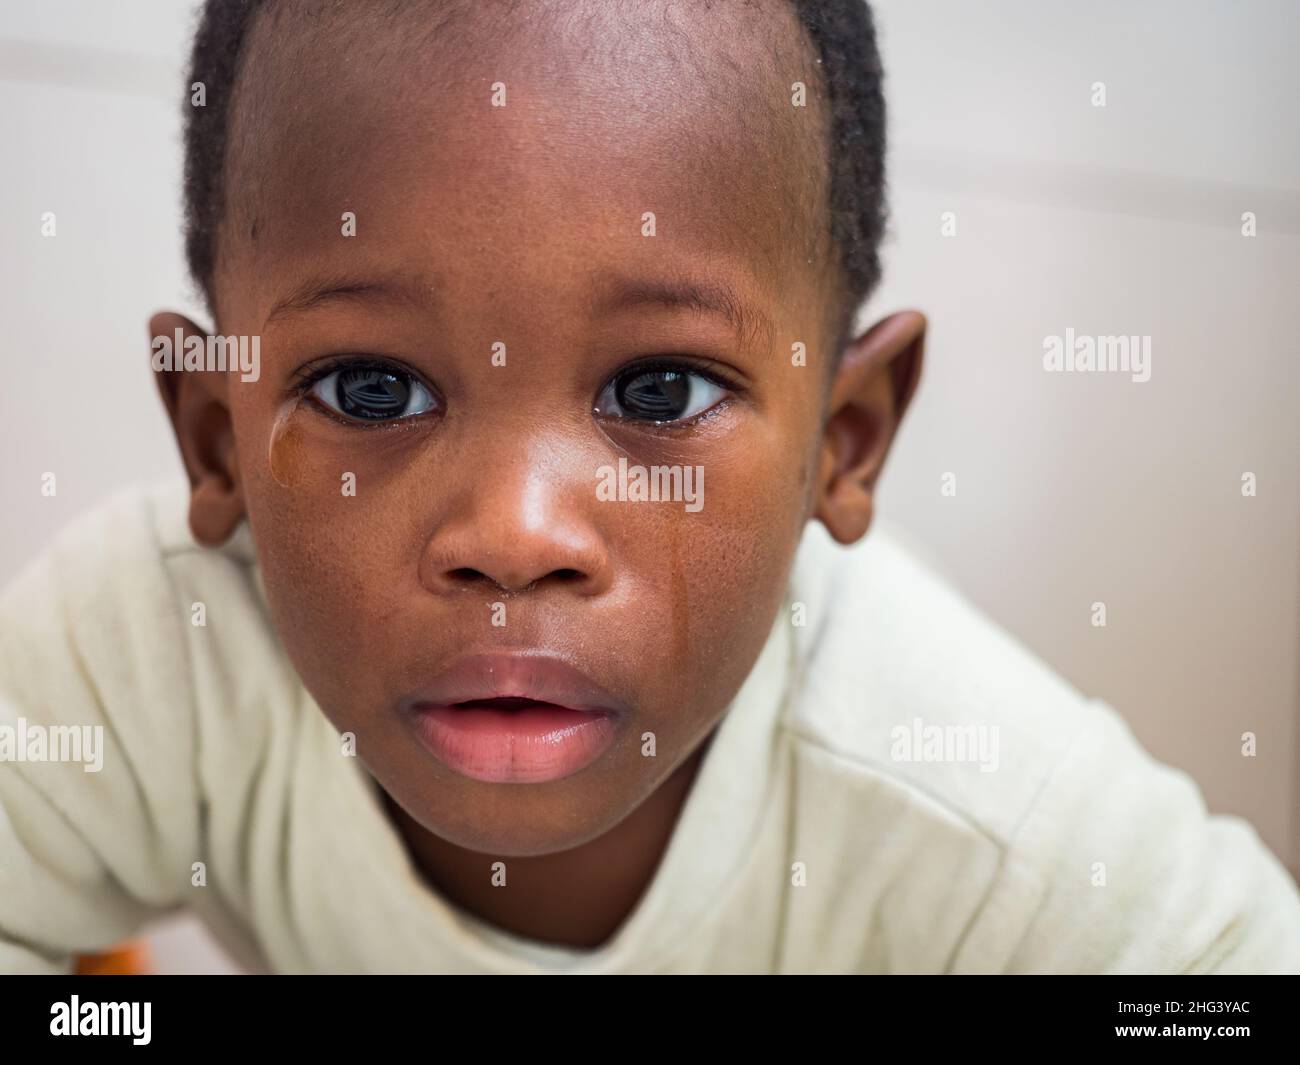 Senegal, Africa - January 24, 2019: Portrait of a small black crying boy with a big eyes . Stock Photo